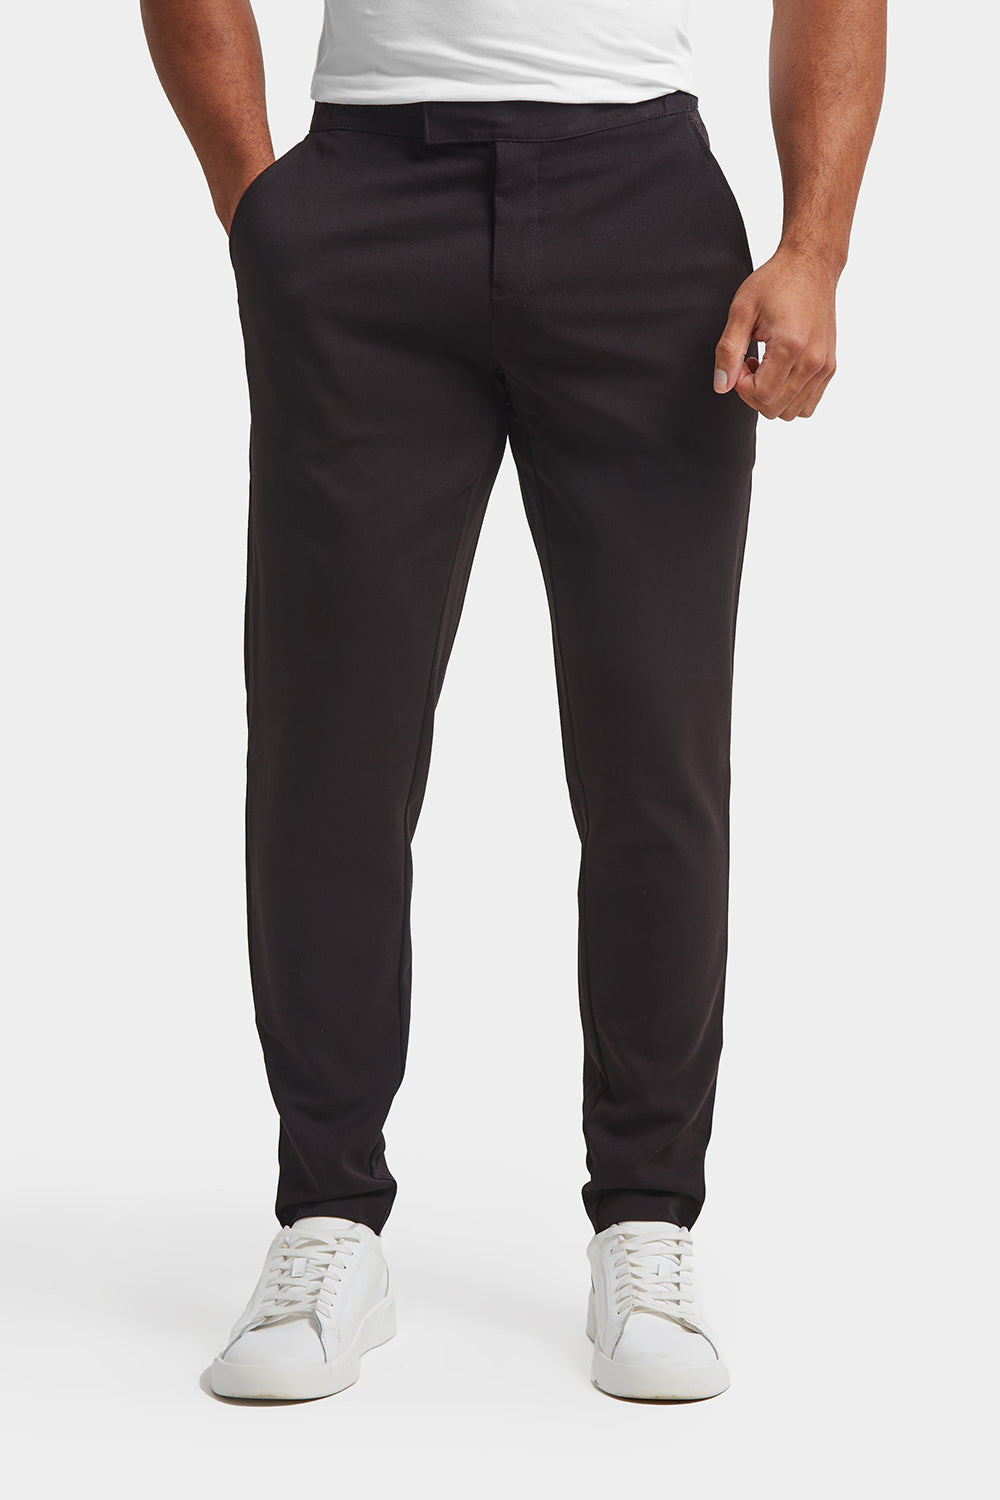 Muscle Fit Trousers - TAILORED ATHLETE - ROW